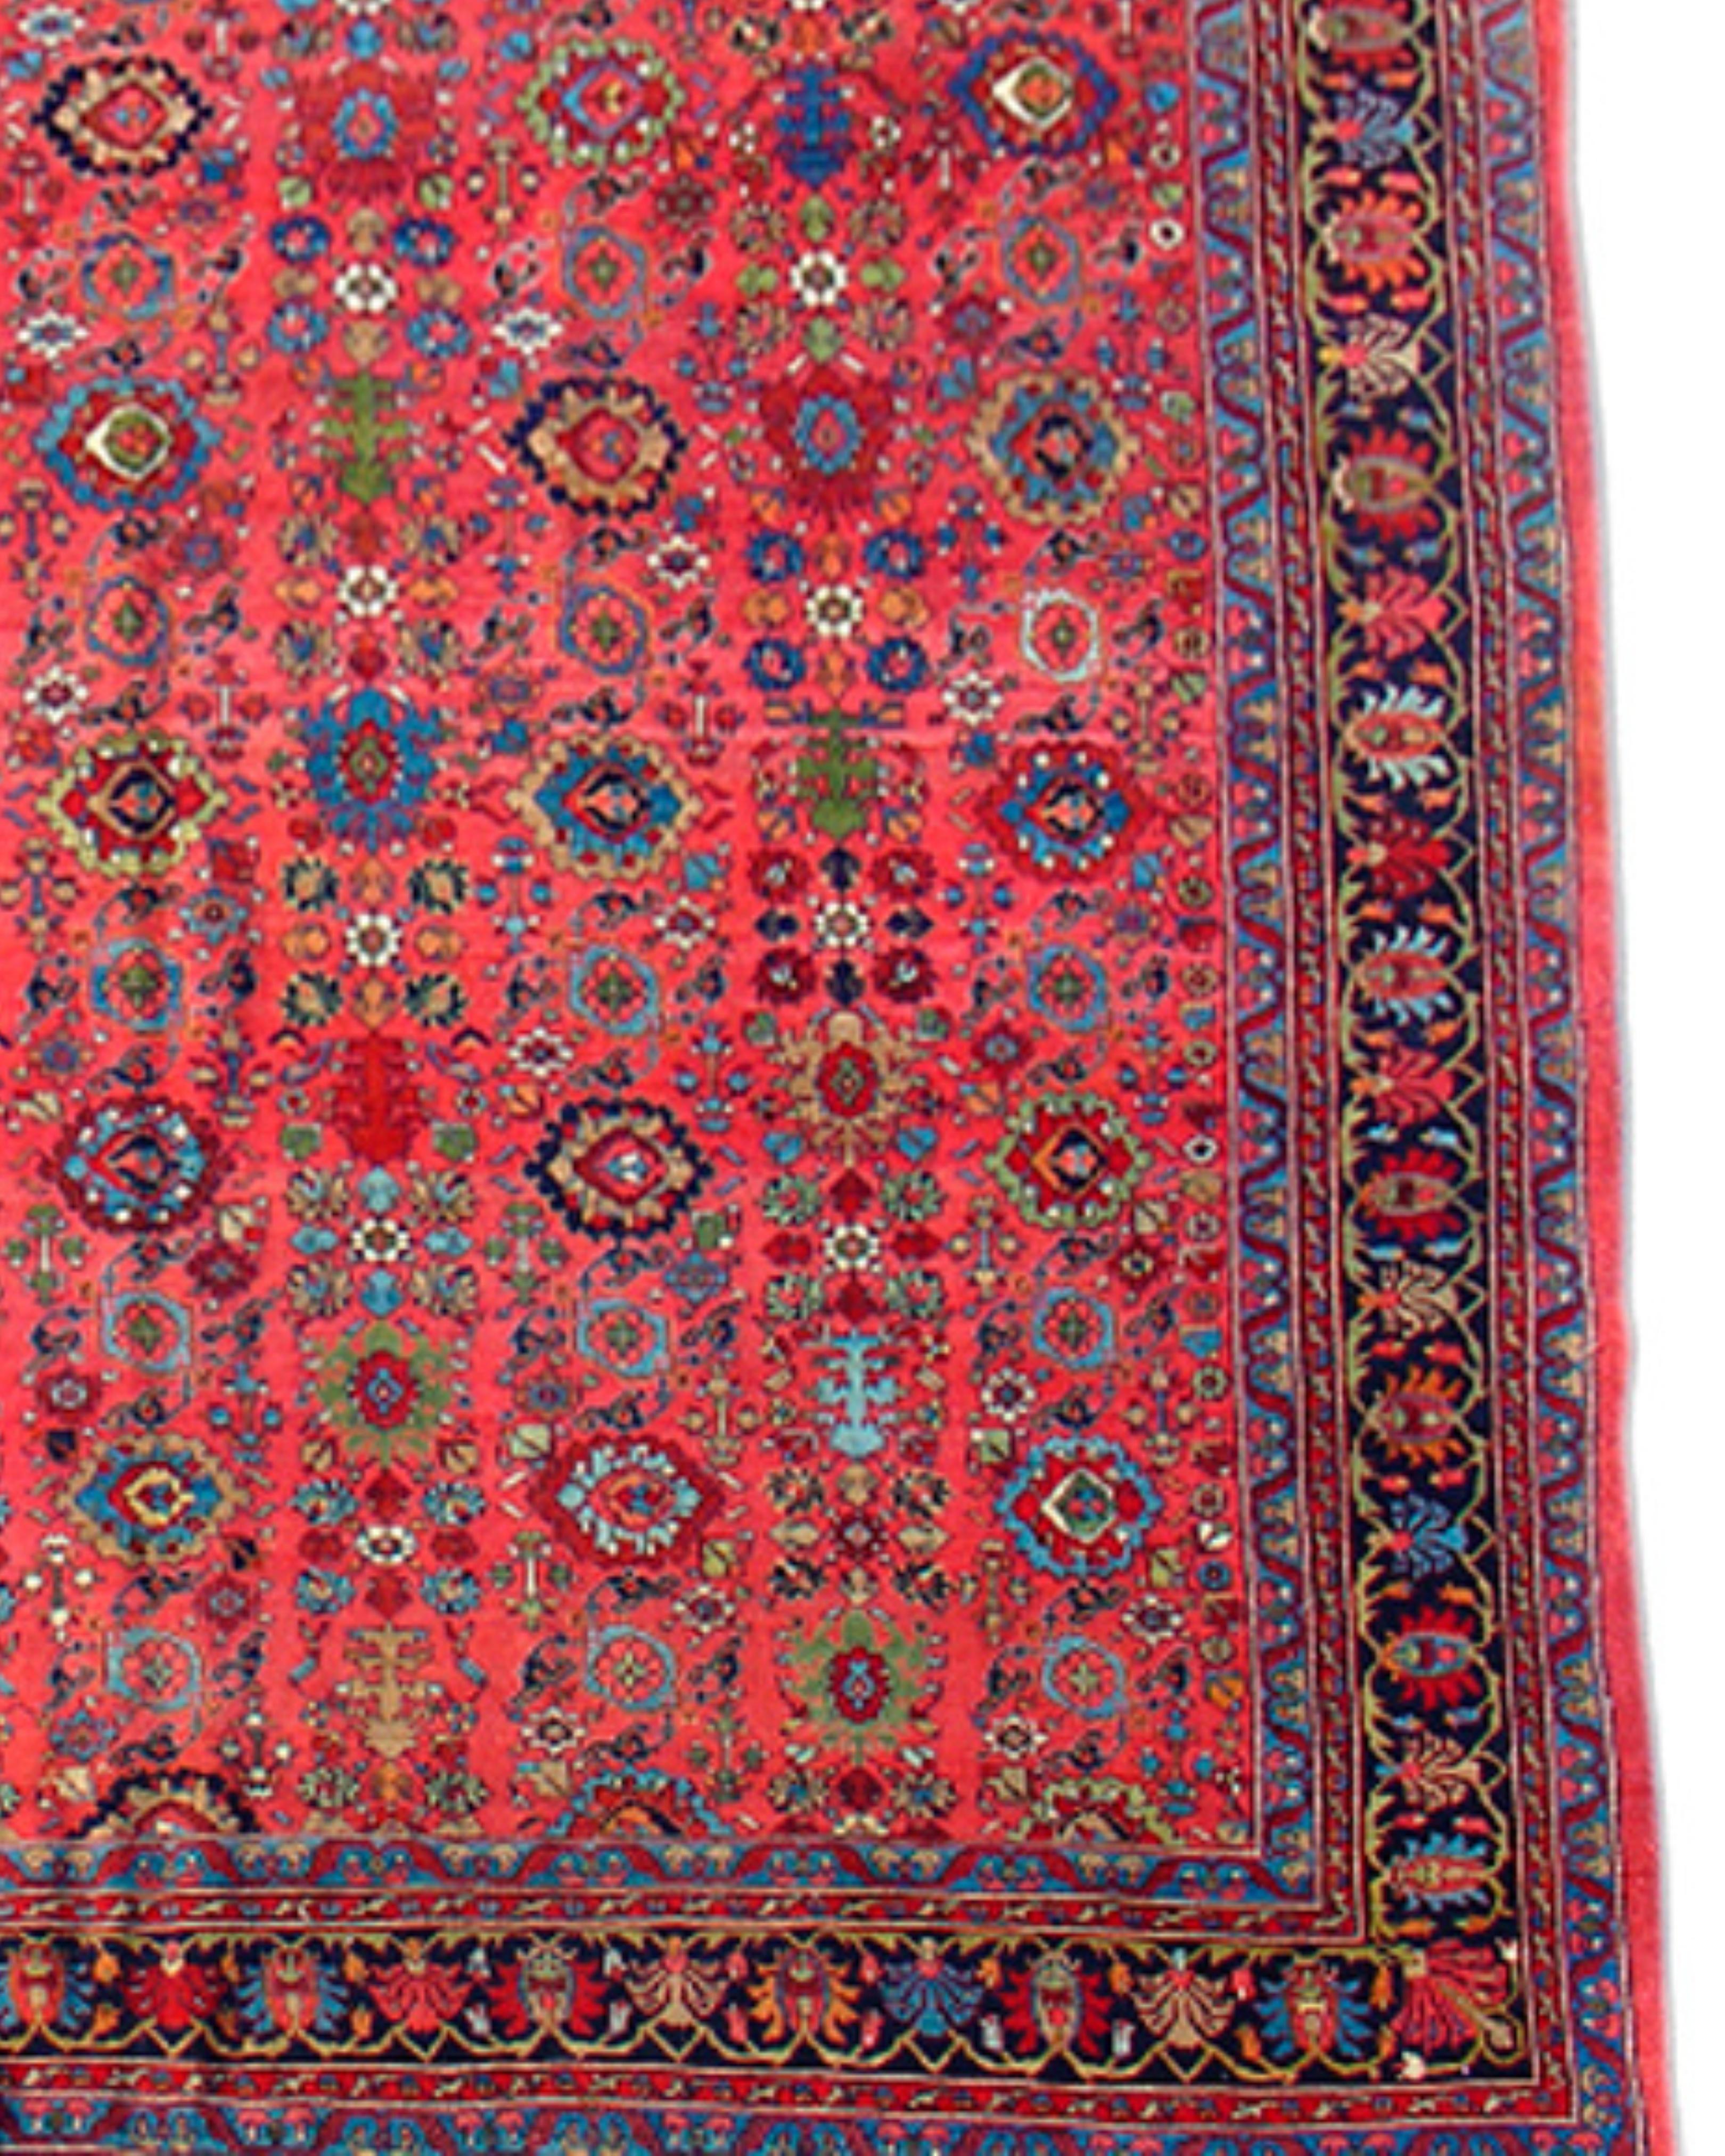 Antique Oversized Large Persian Bidjar Carpet, Early 20th Century

Woven with the sturdy construction for which Bidjar carpets are renowned, this over-sized piece glistens with a rich jewel-like palette of color. Ruby, emerald and aquamarine hues